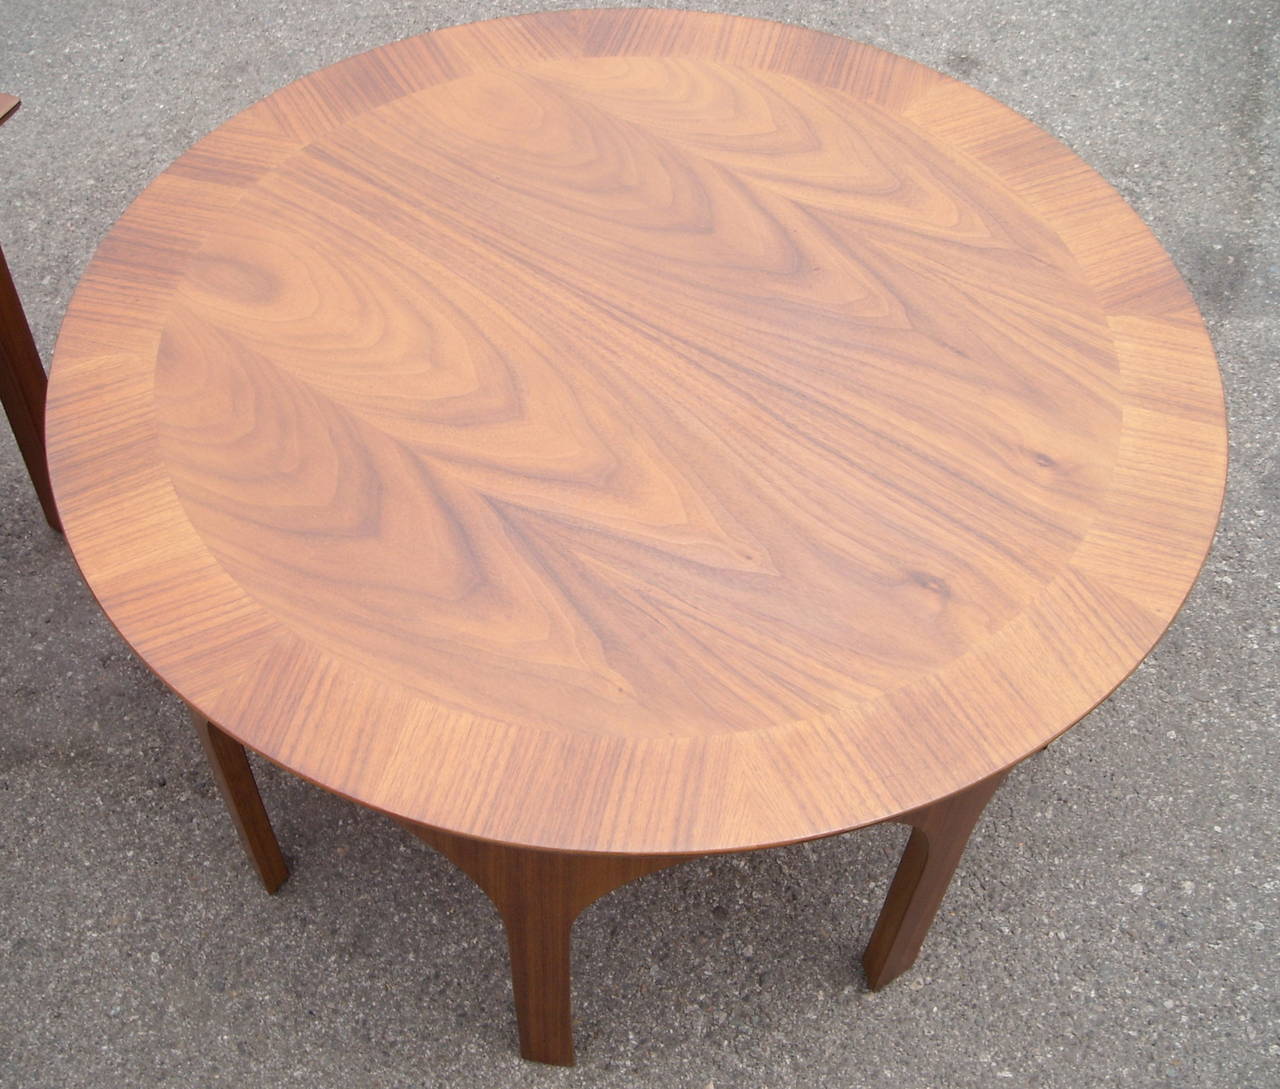 Great and traditional matching colosseum line, coffee or cocktail and rectangular Robsjohn Gibbings tables, can be sold individually, marked widdicomb . The side rectangular table measures; W 30 x D 18 x H 17 inches.